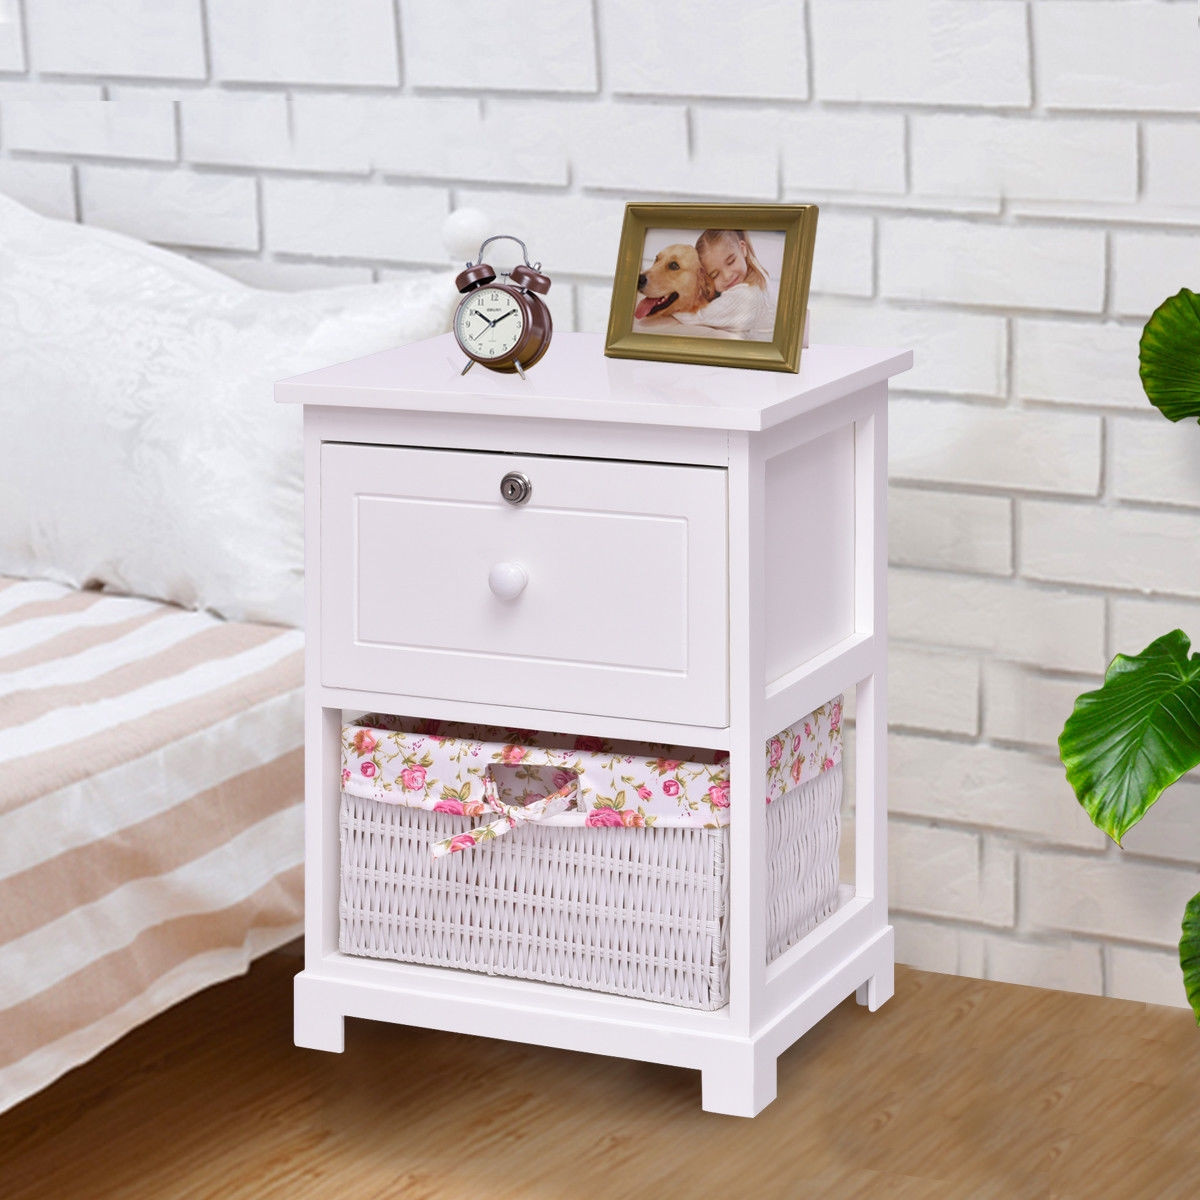 2 Tiers Wood Nightstand w/ 1 Drawer and 1 Basket